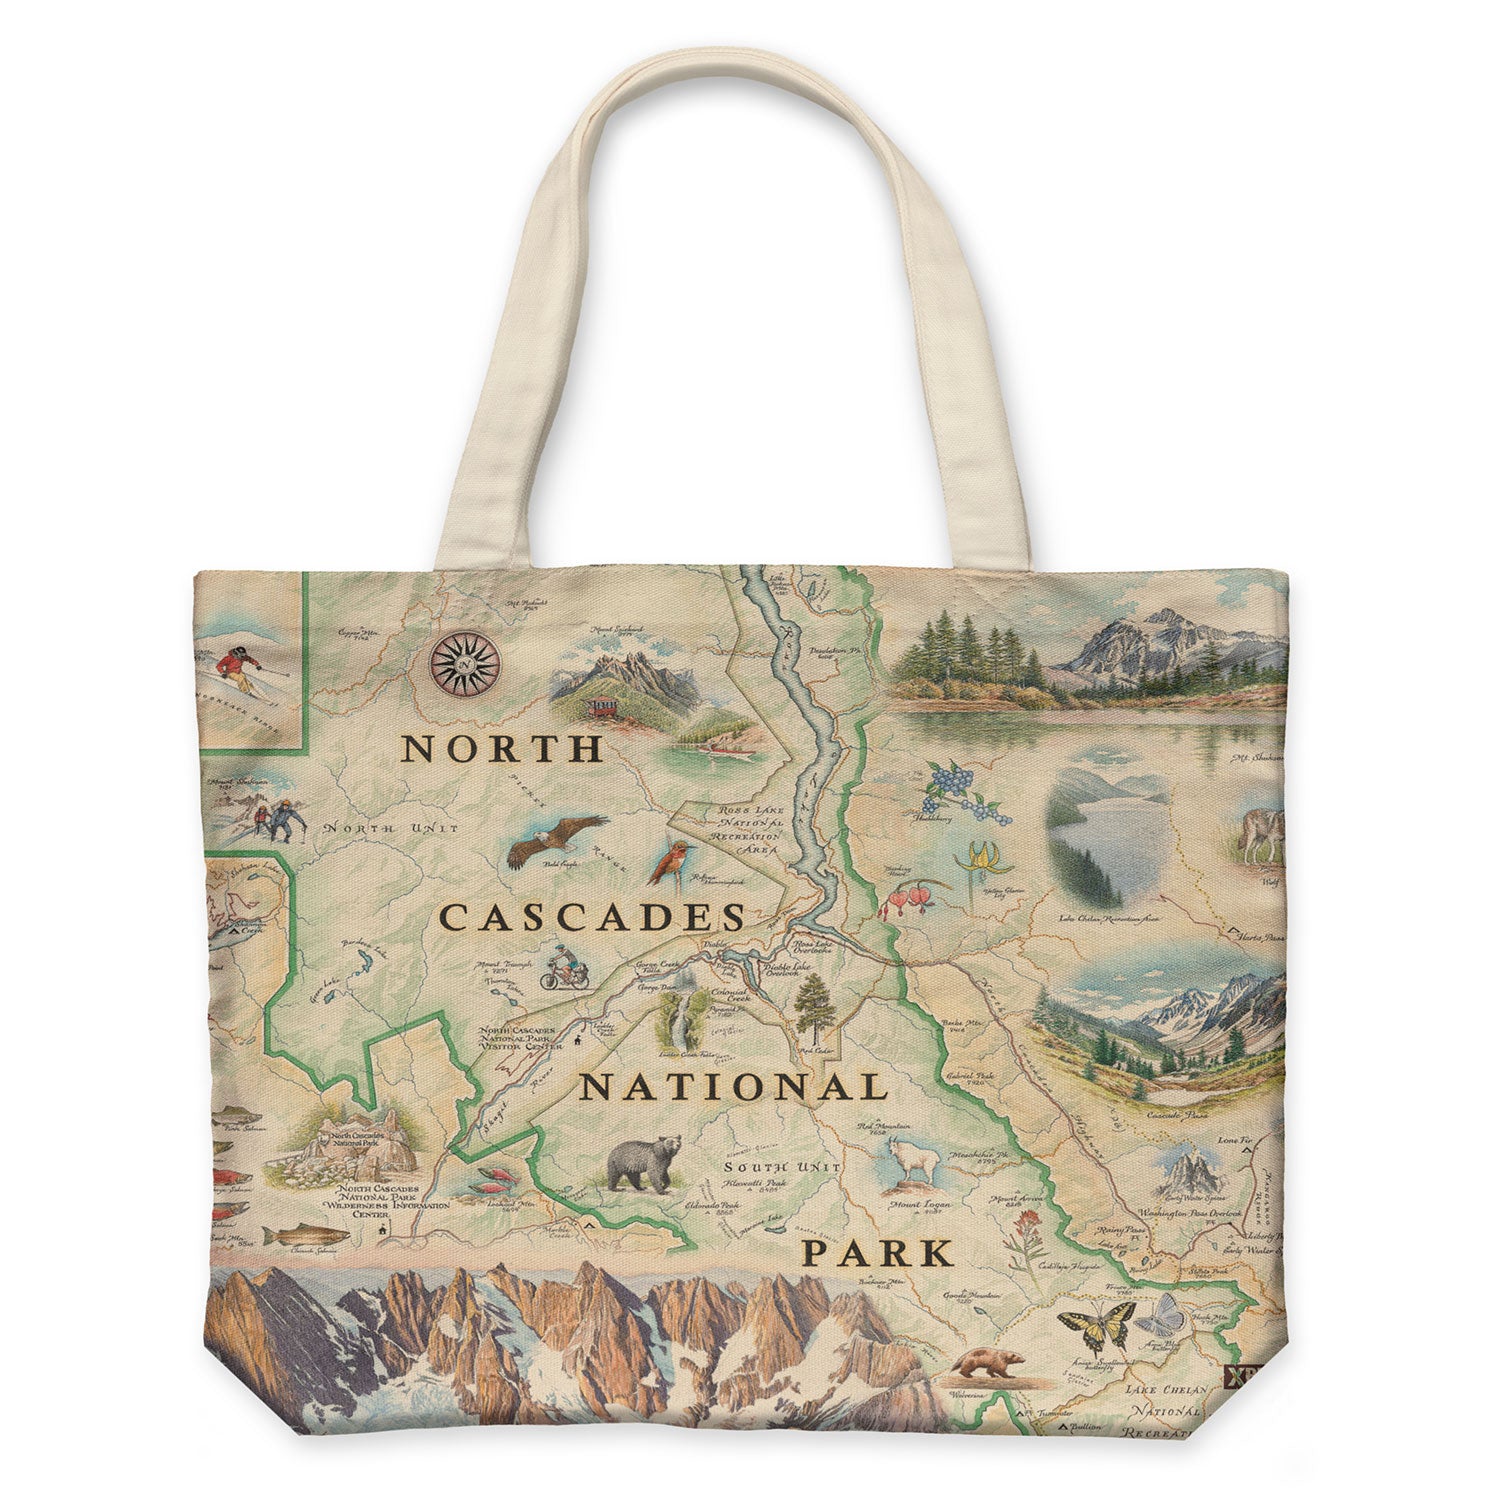 North Cascades National Park Canvas Tote Bags -  Xplorer Maps. The map features illustrations of flora and fauna such as black bears, elk, wolverine, glacier lilies, and huckleberries. Other illustrations include Pickett Range, Cascade Pass, and Lake Chelan Recreation area.